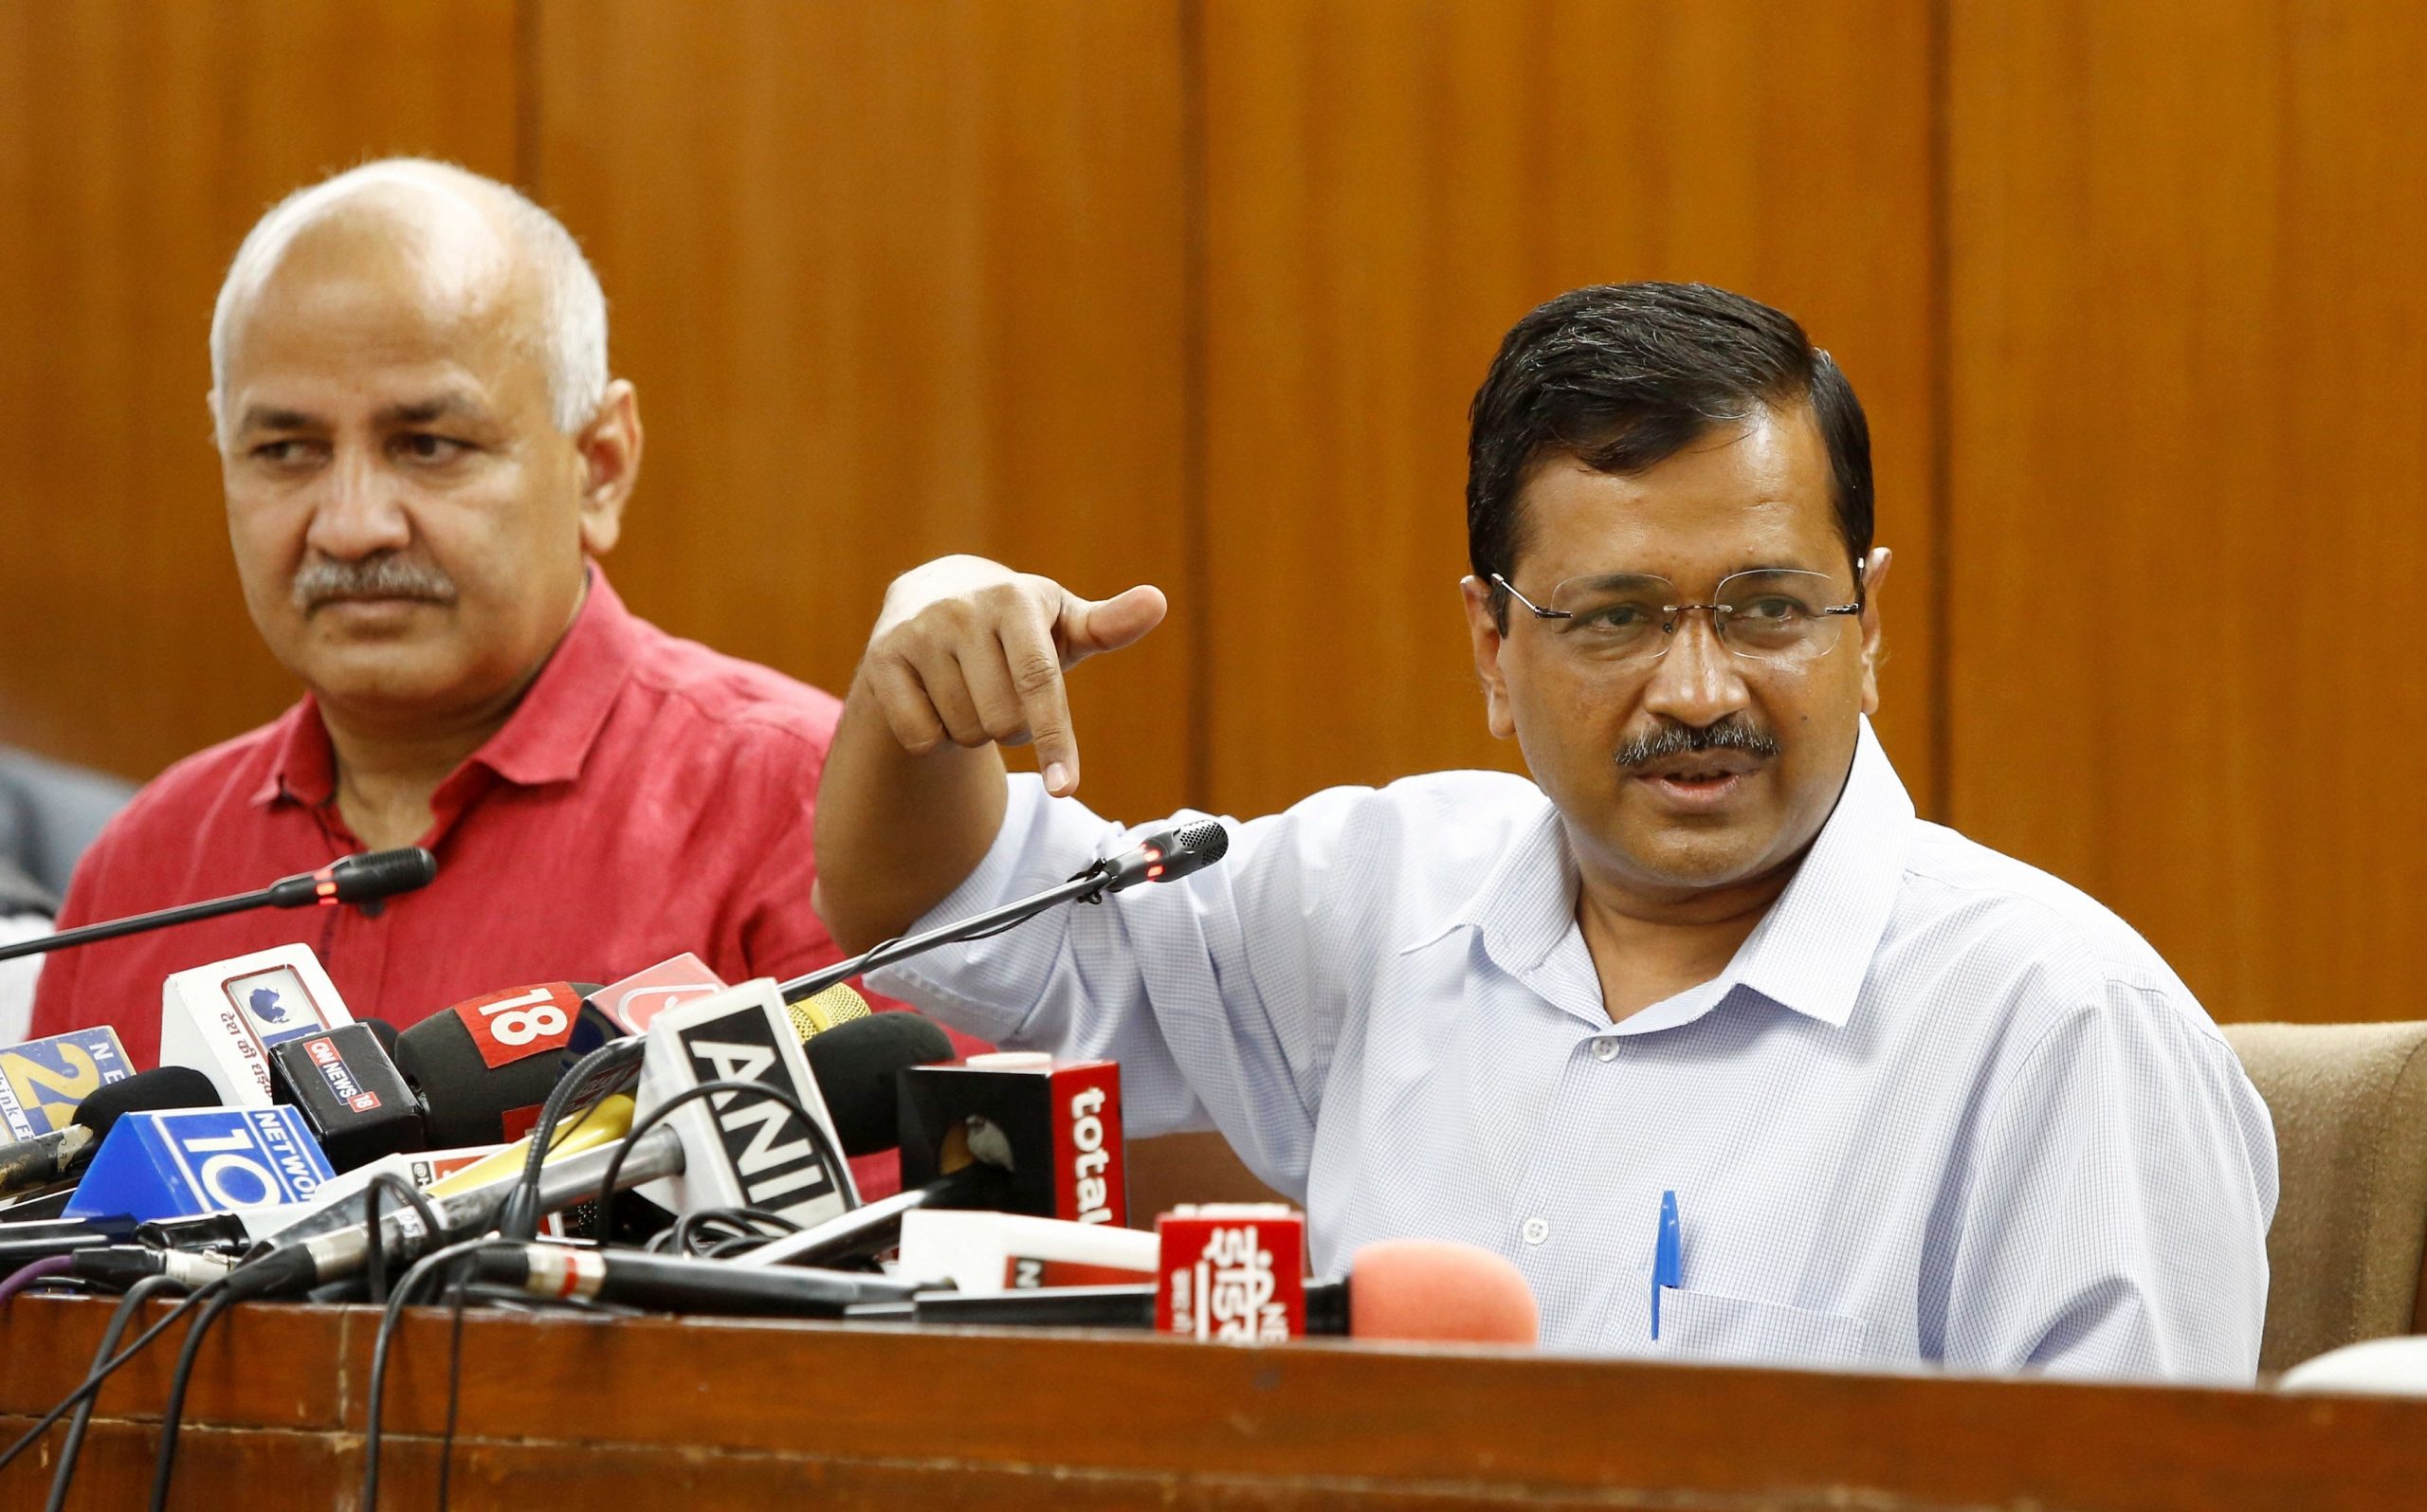 Explained: Why Arvind Kejriwal, AAP are upset over Centre’s bill on Delhi tabled in Lok Sabha